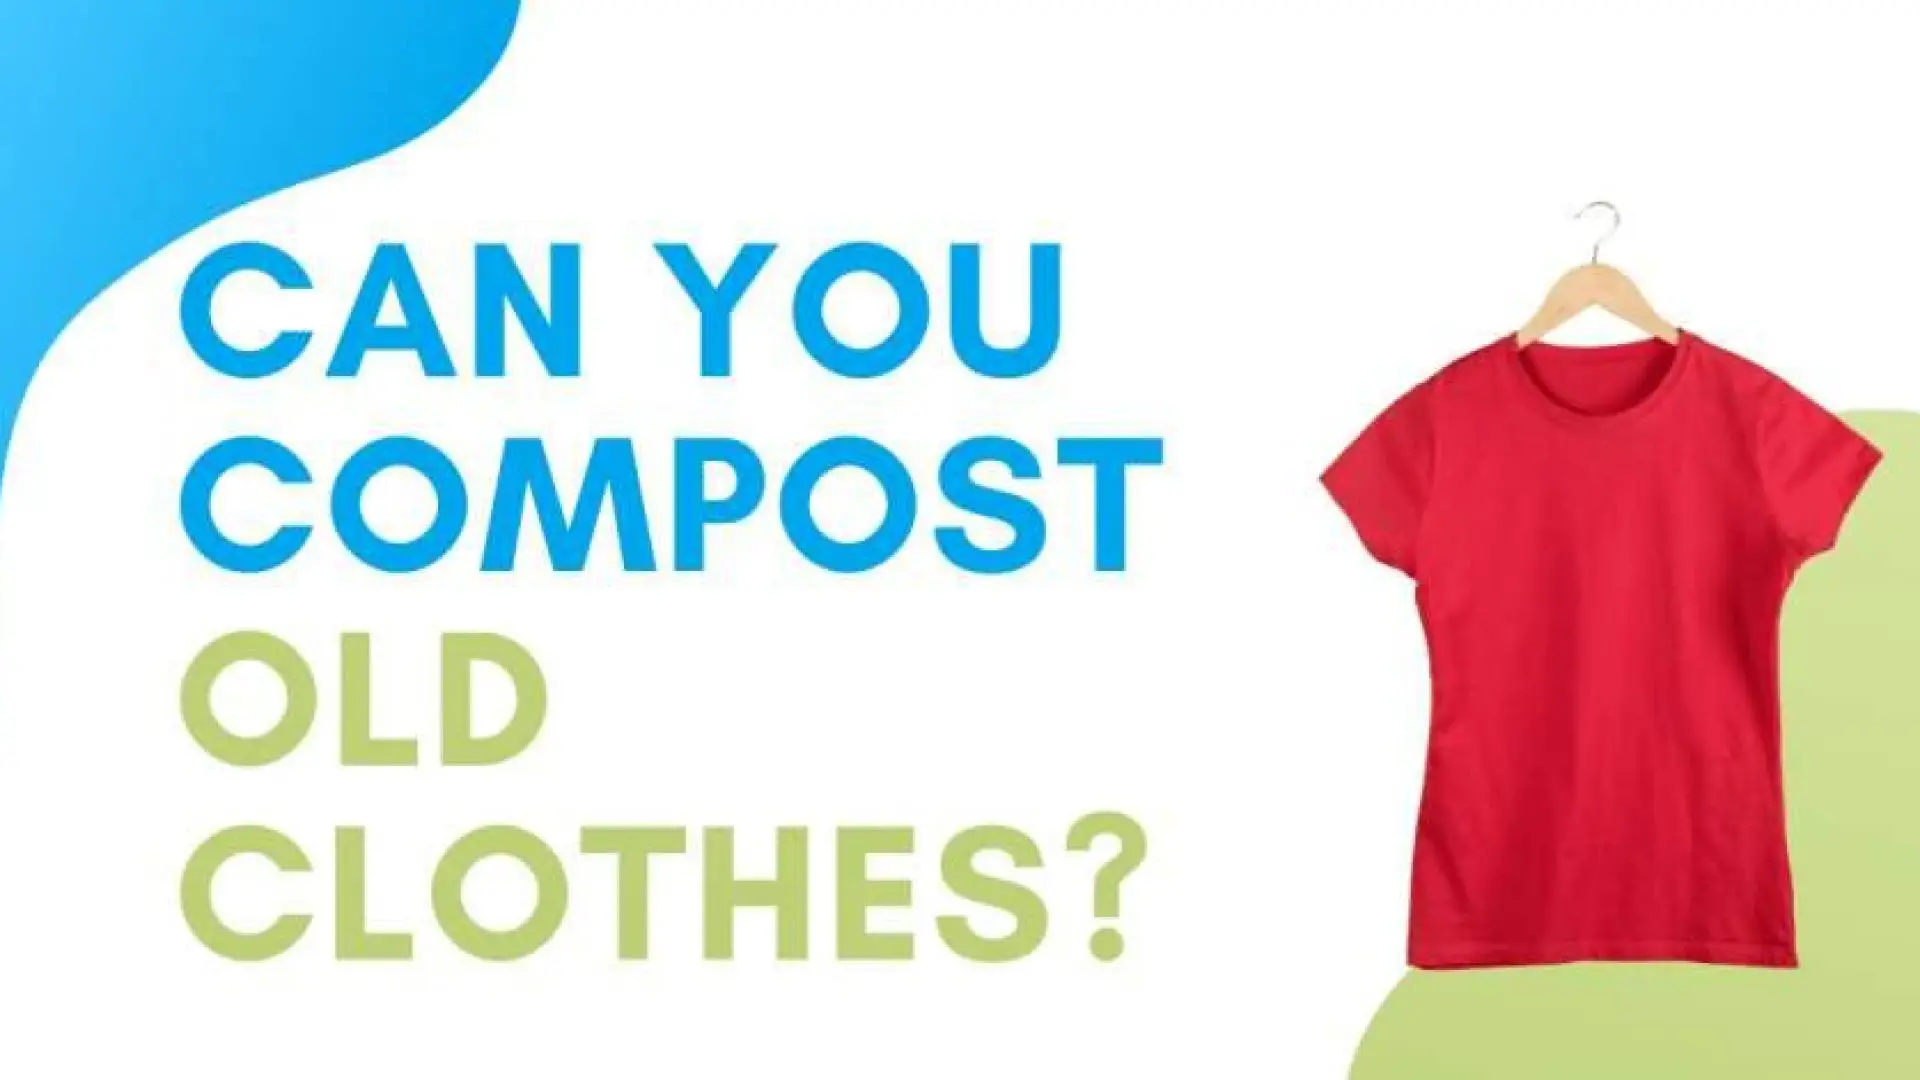 Can You Compost Old Clothes? Yes! Here’s How